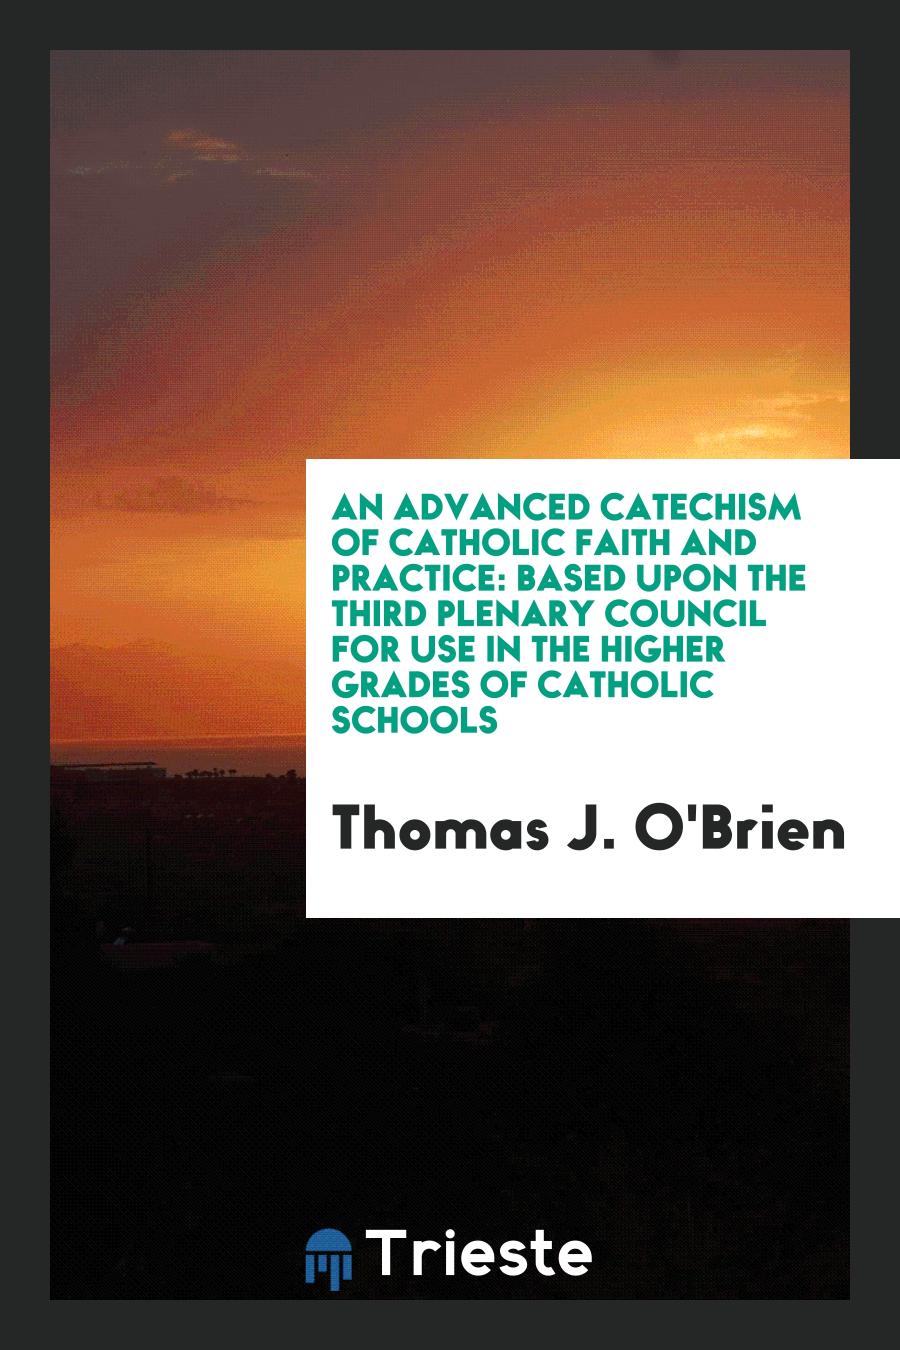 An Advanced Catechism of Catholic Faith and Practice: Based upon the Third Plenary Council for Use in the Higher Grades of Catholic Schools